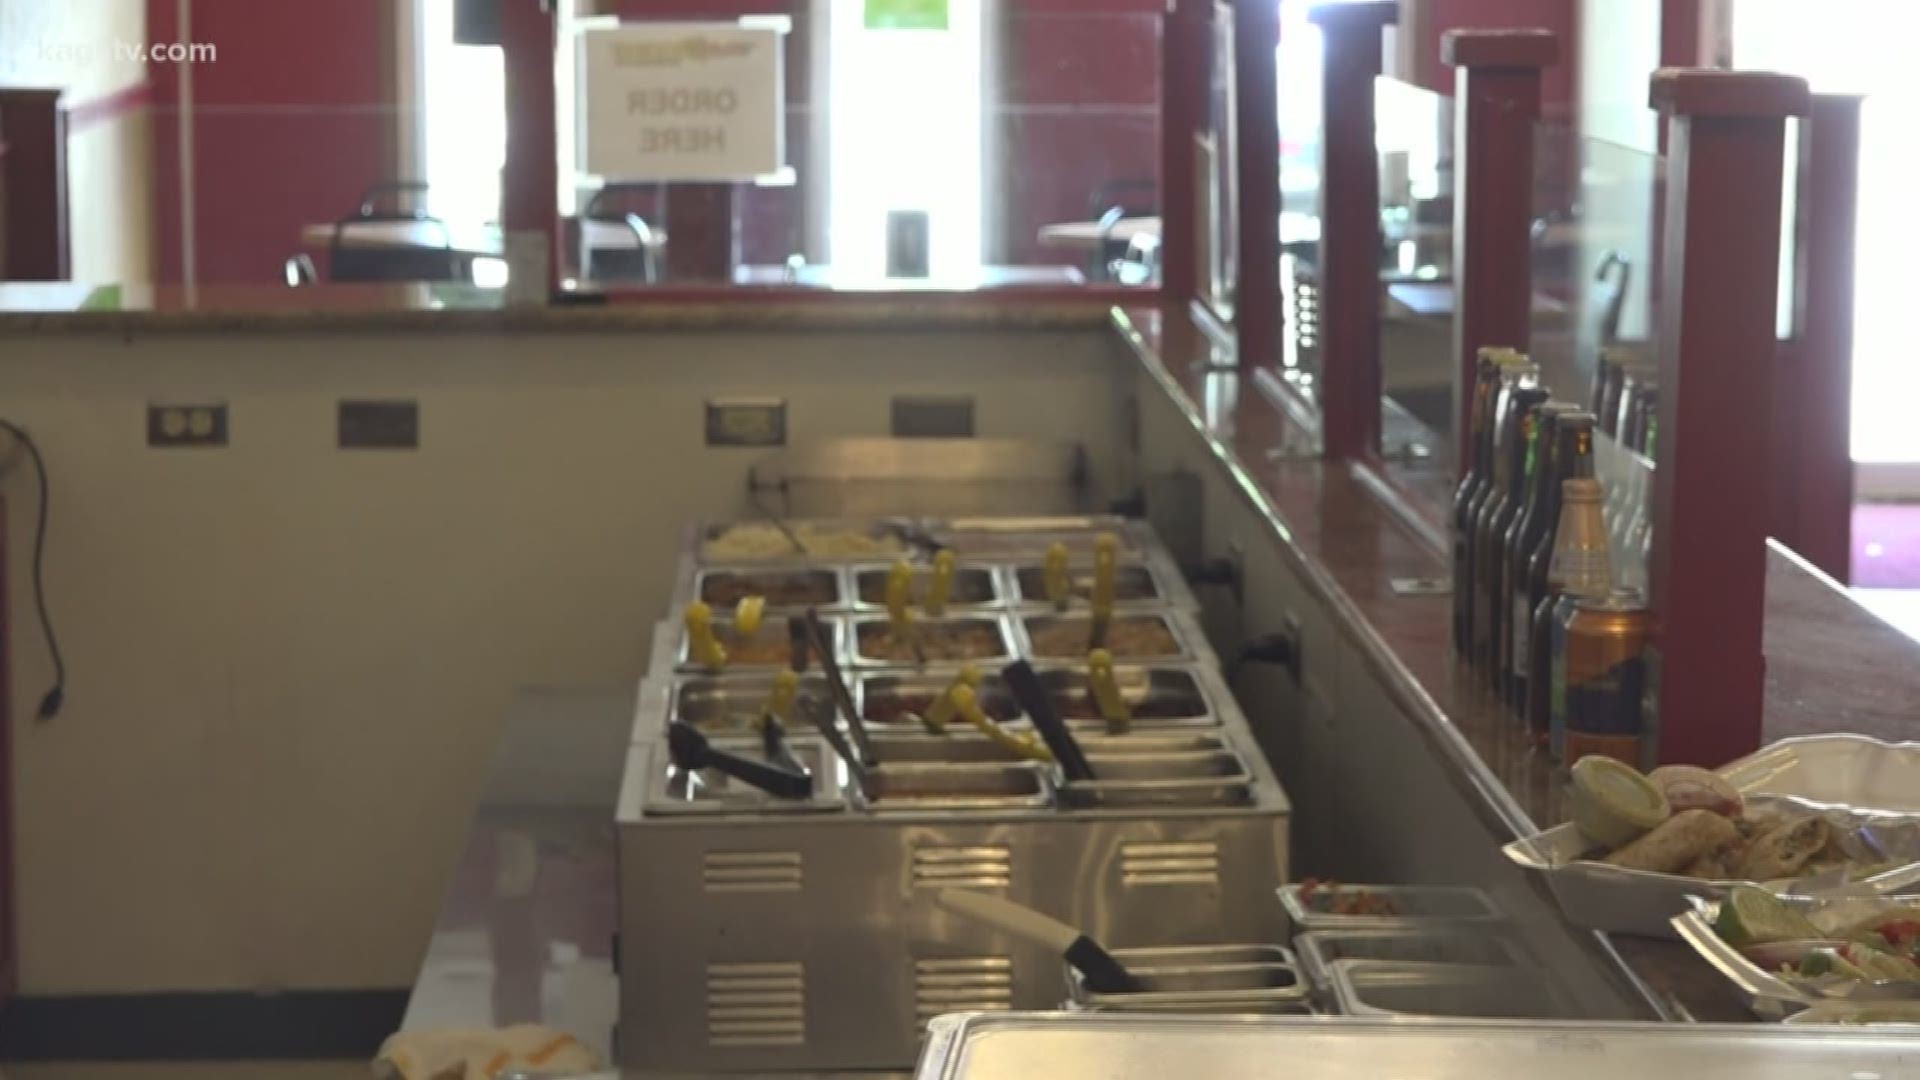 Taco Crave is used to seeing over 100 customers a day, but the owner said there is a decline of about 60 or 70 percent.